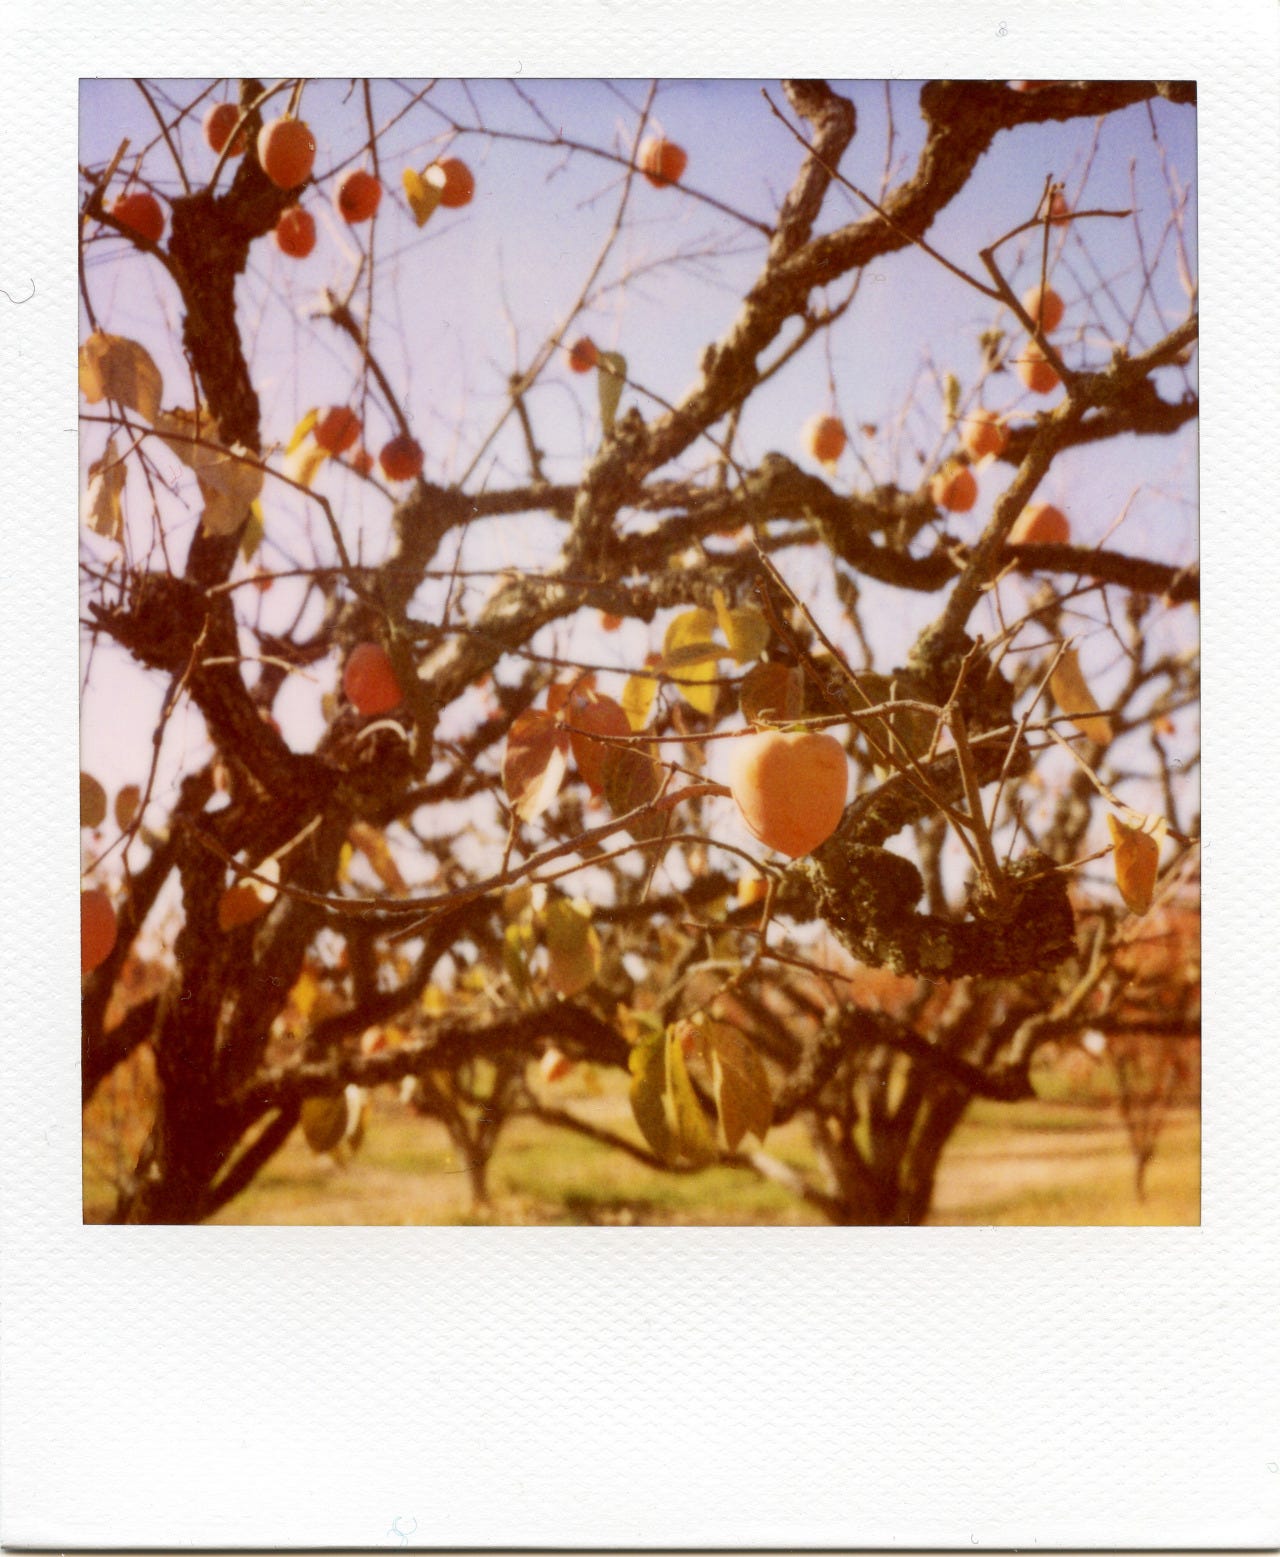 Hoshigaki in the making | My first encounter with a persimmon tree IRL.
‘Roids shot by Pablo and I, respectively. Otow Orchard, Granite Bay.